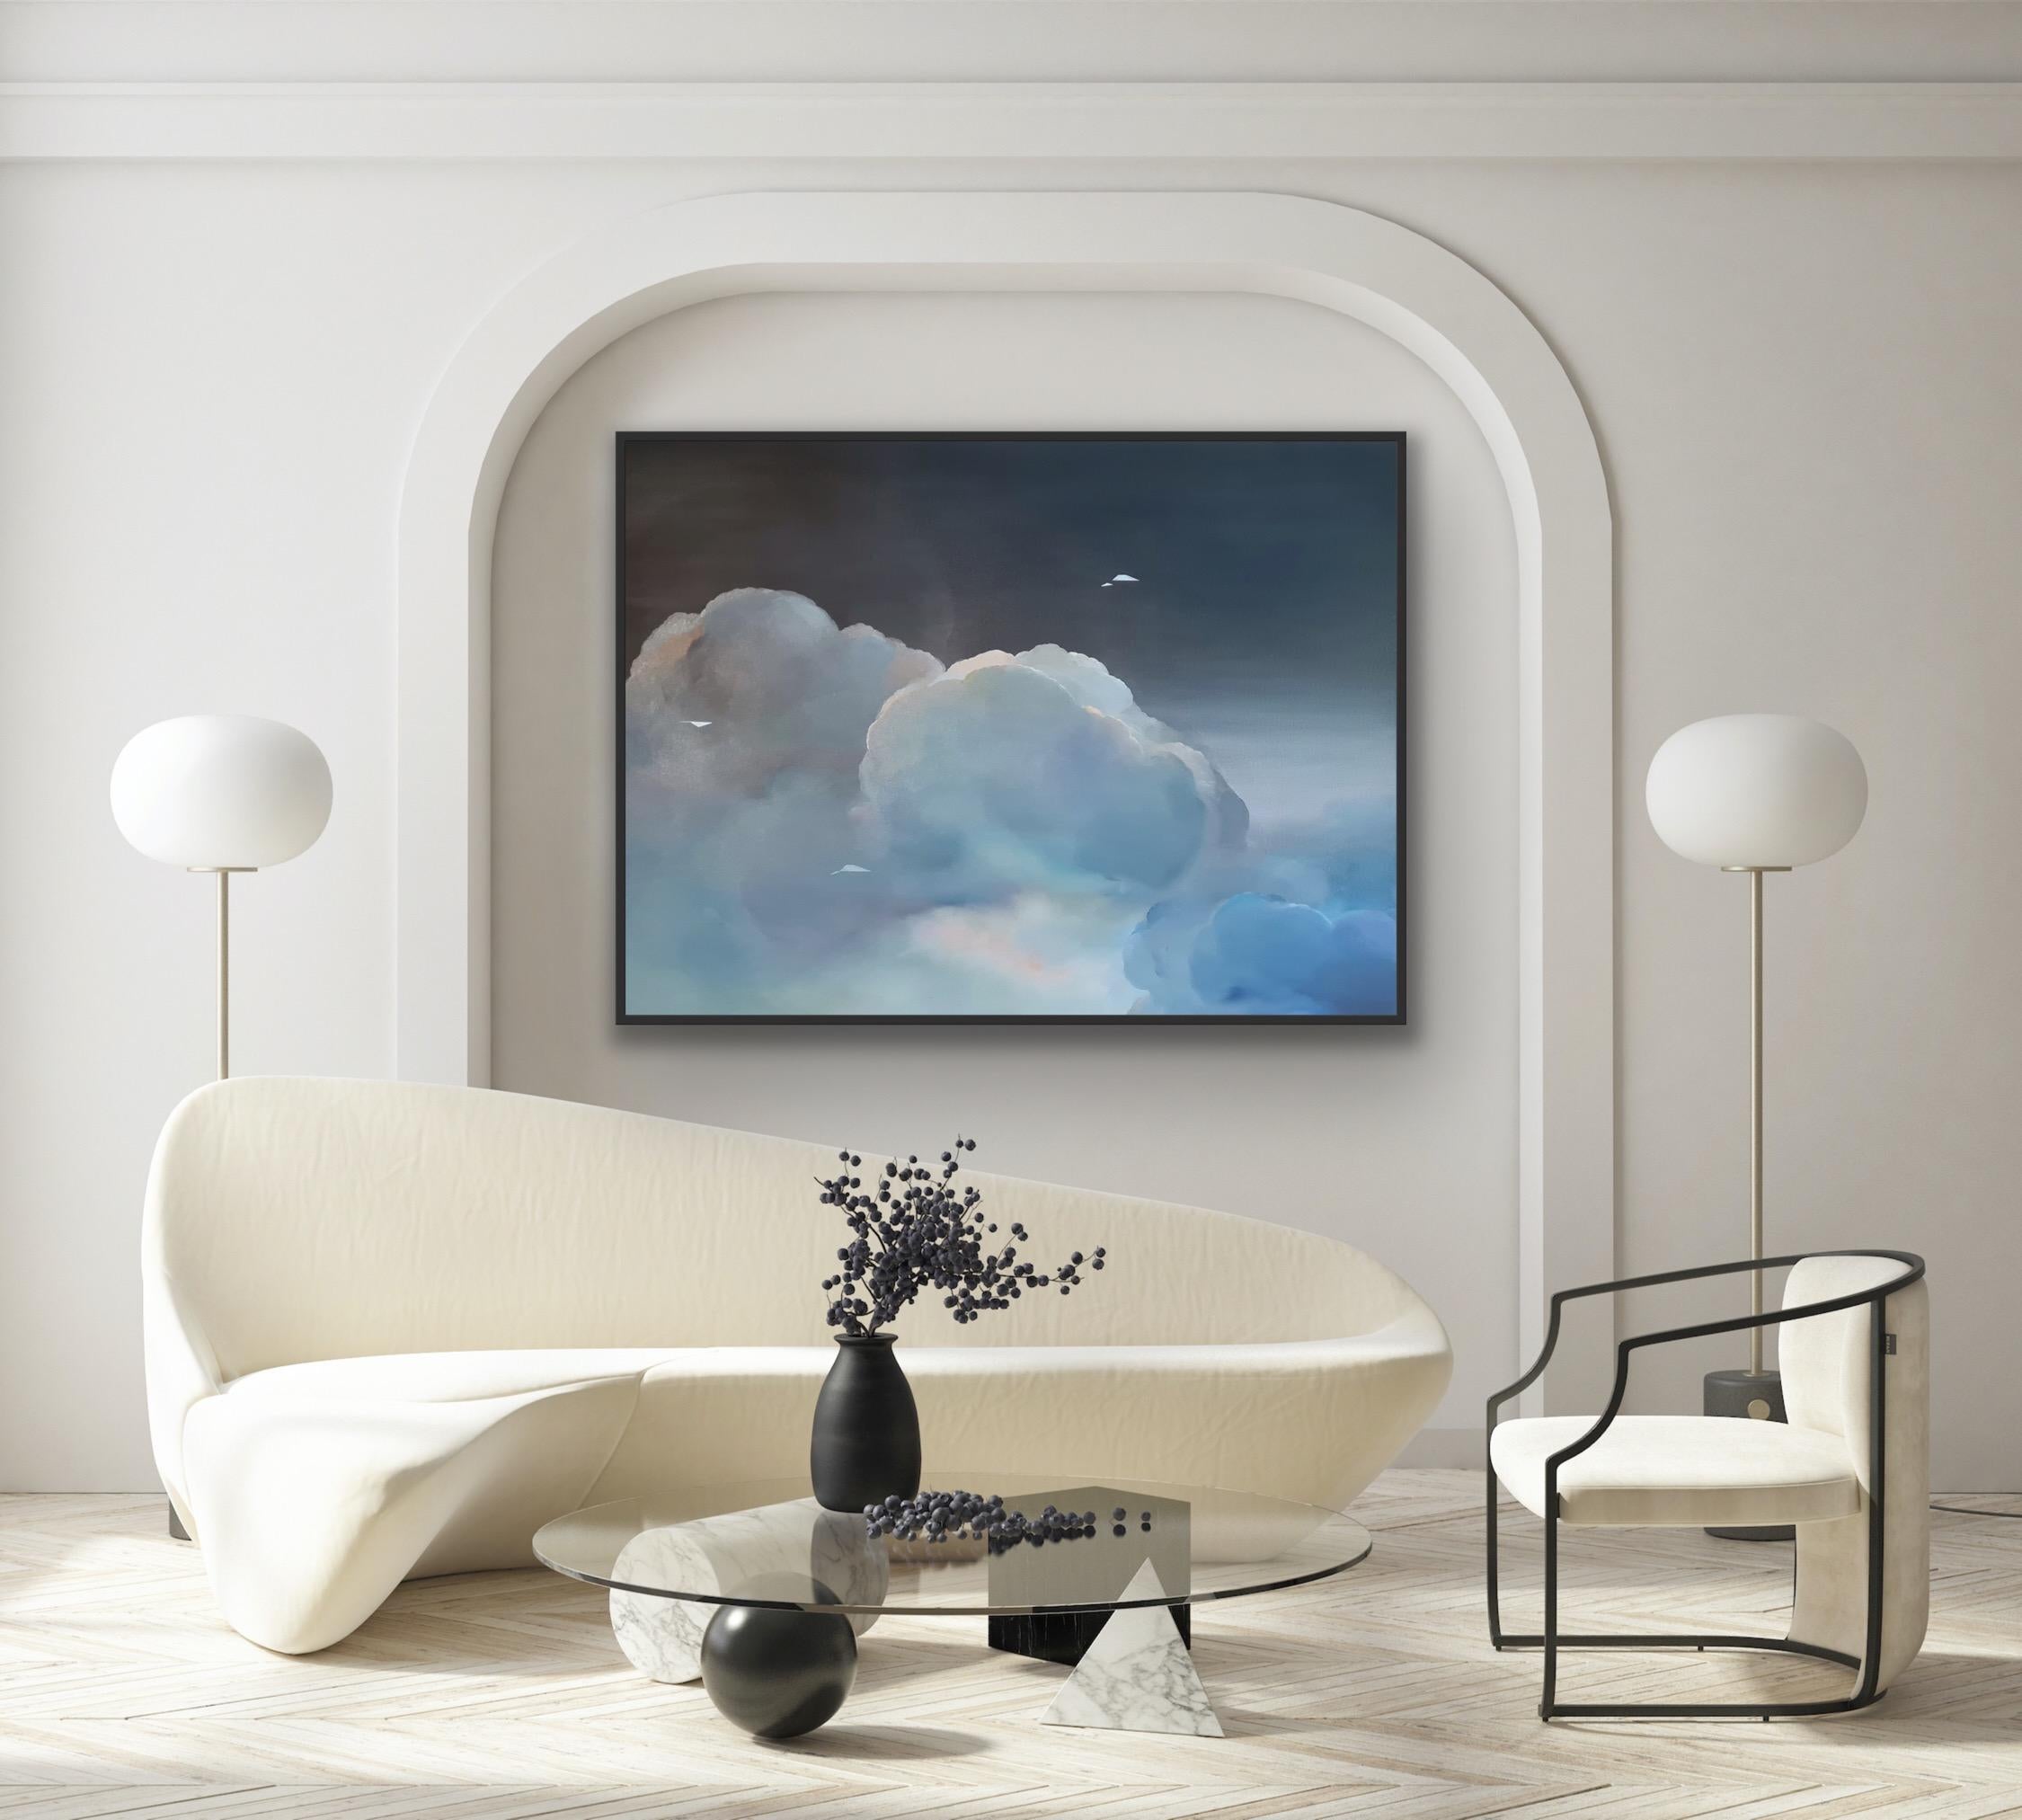 Migration: DeJa V, Original painting, Skyscape, Abstract, Clouds, Night, Blue - Painting by Yuliya Martynova